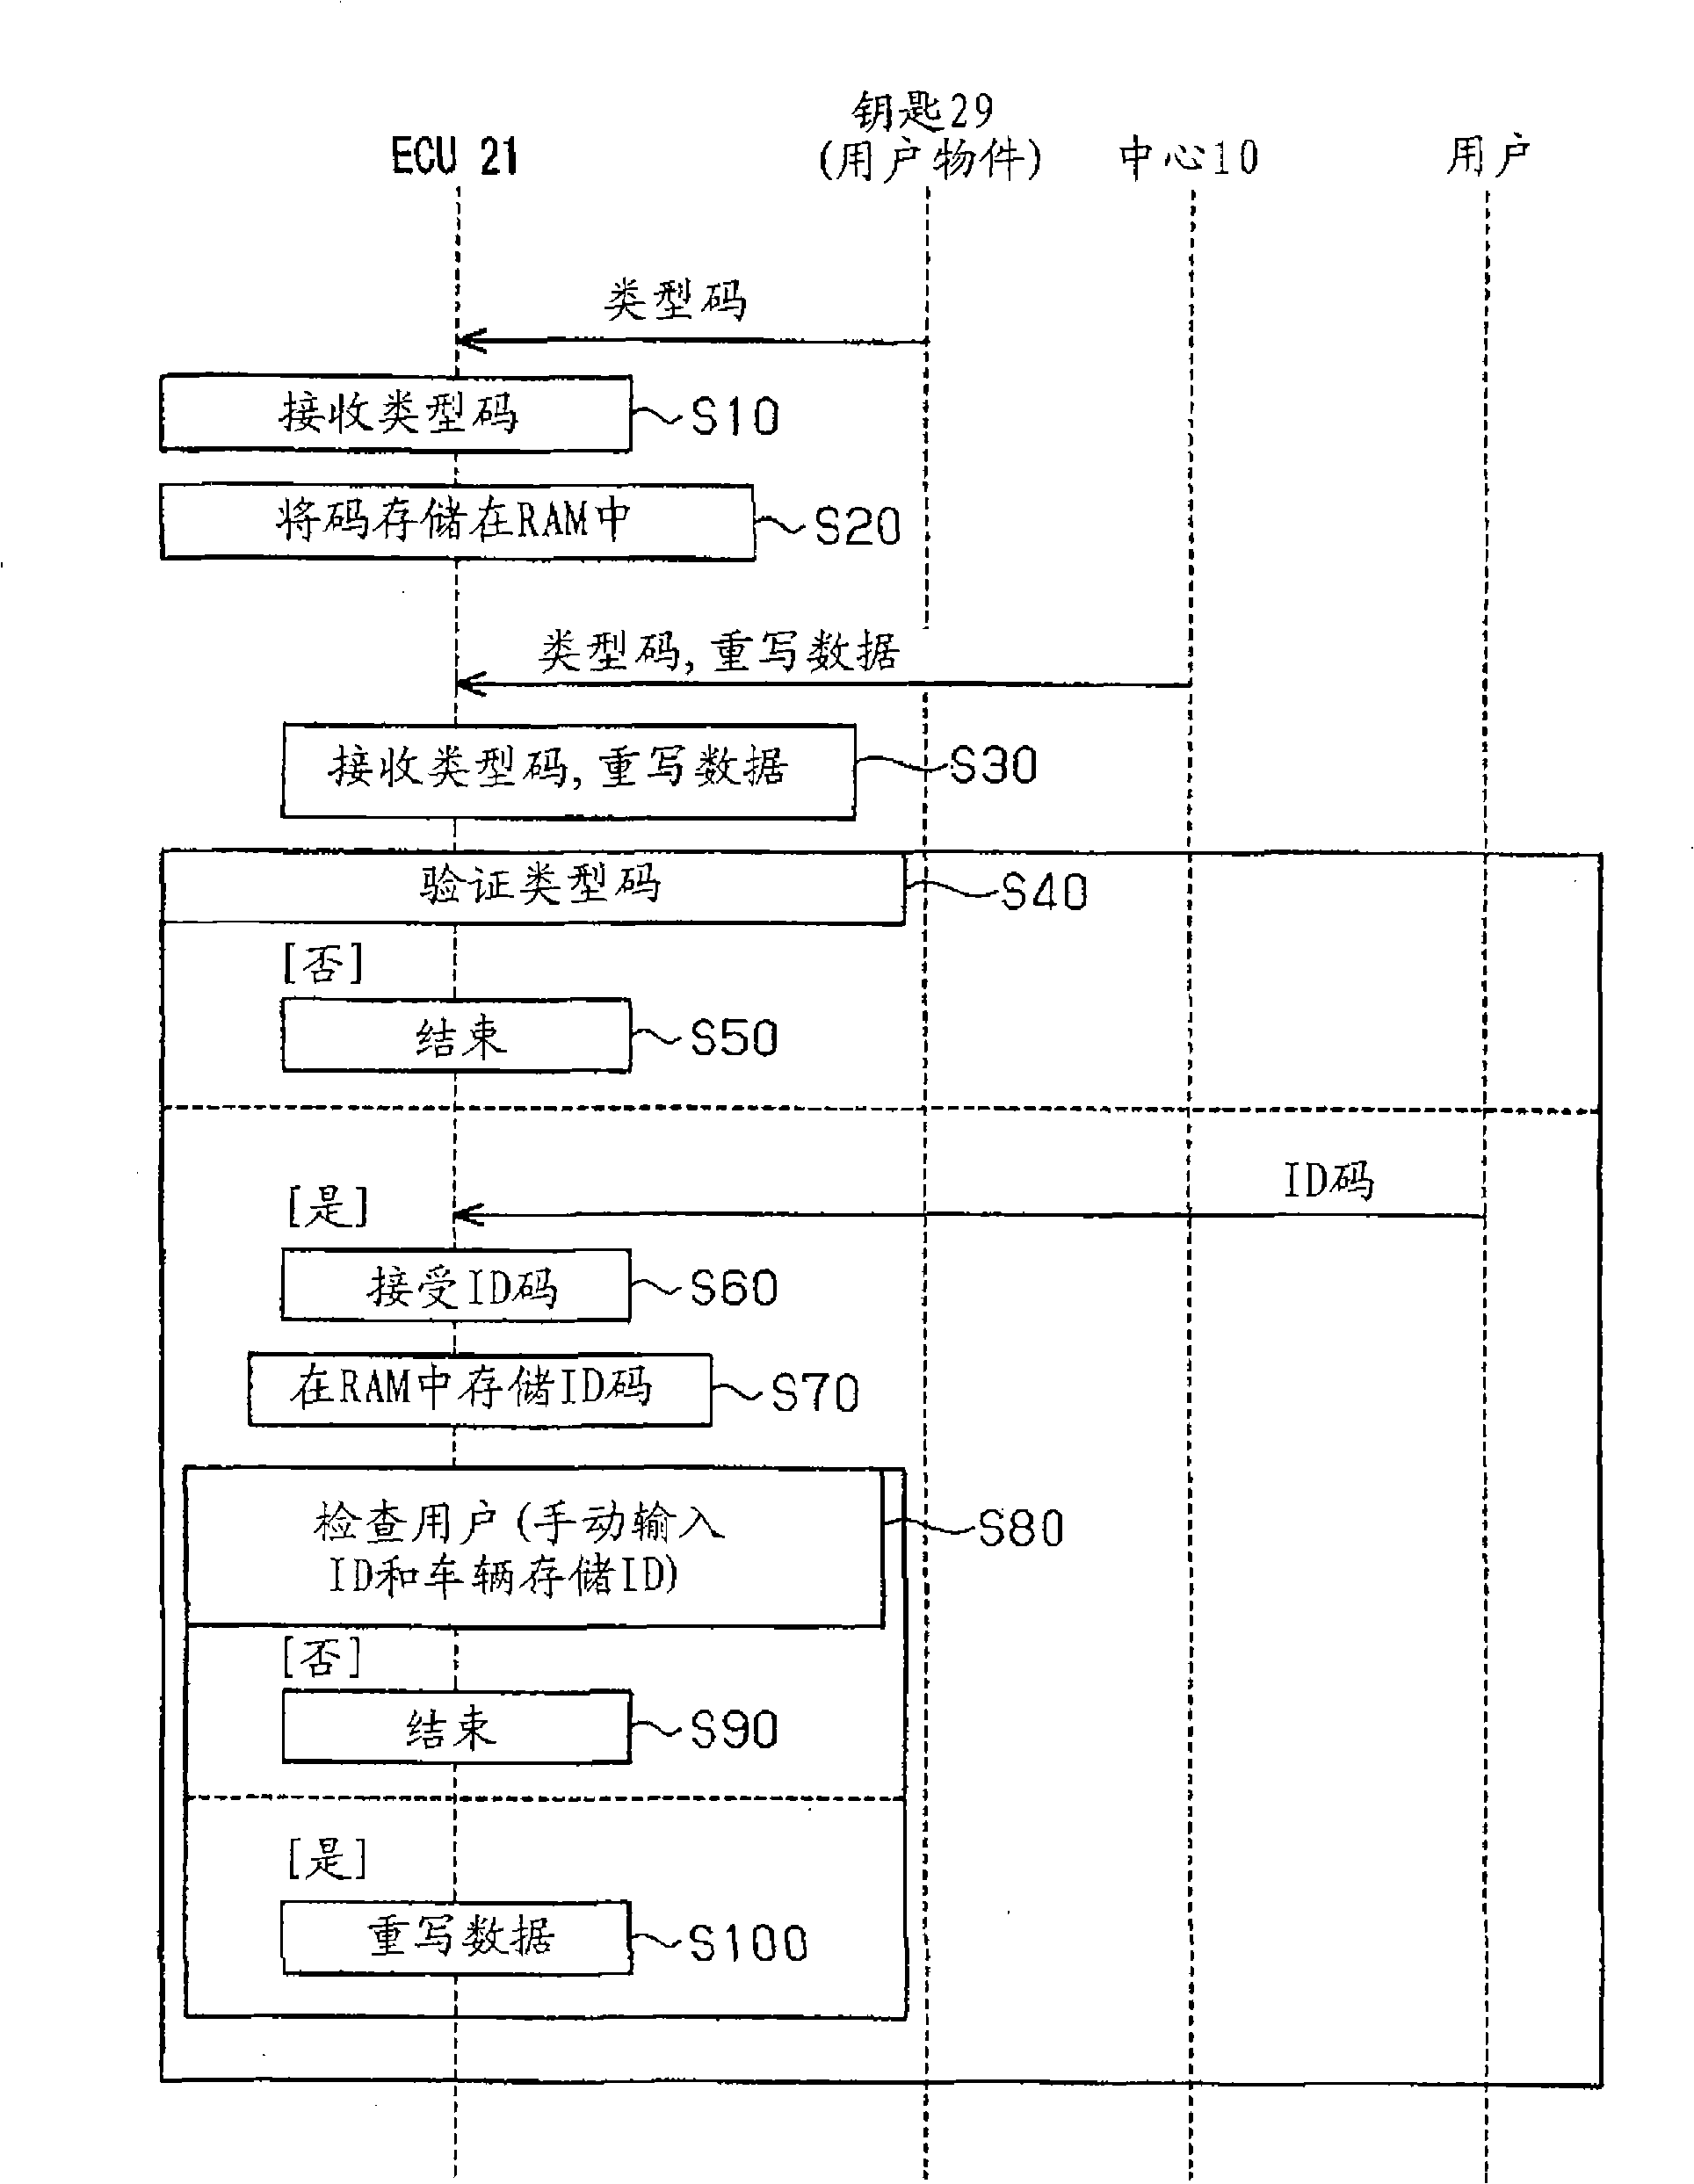 Vehicle control device and data rewriting system